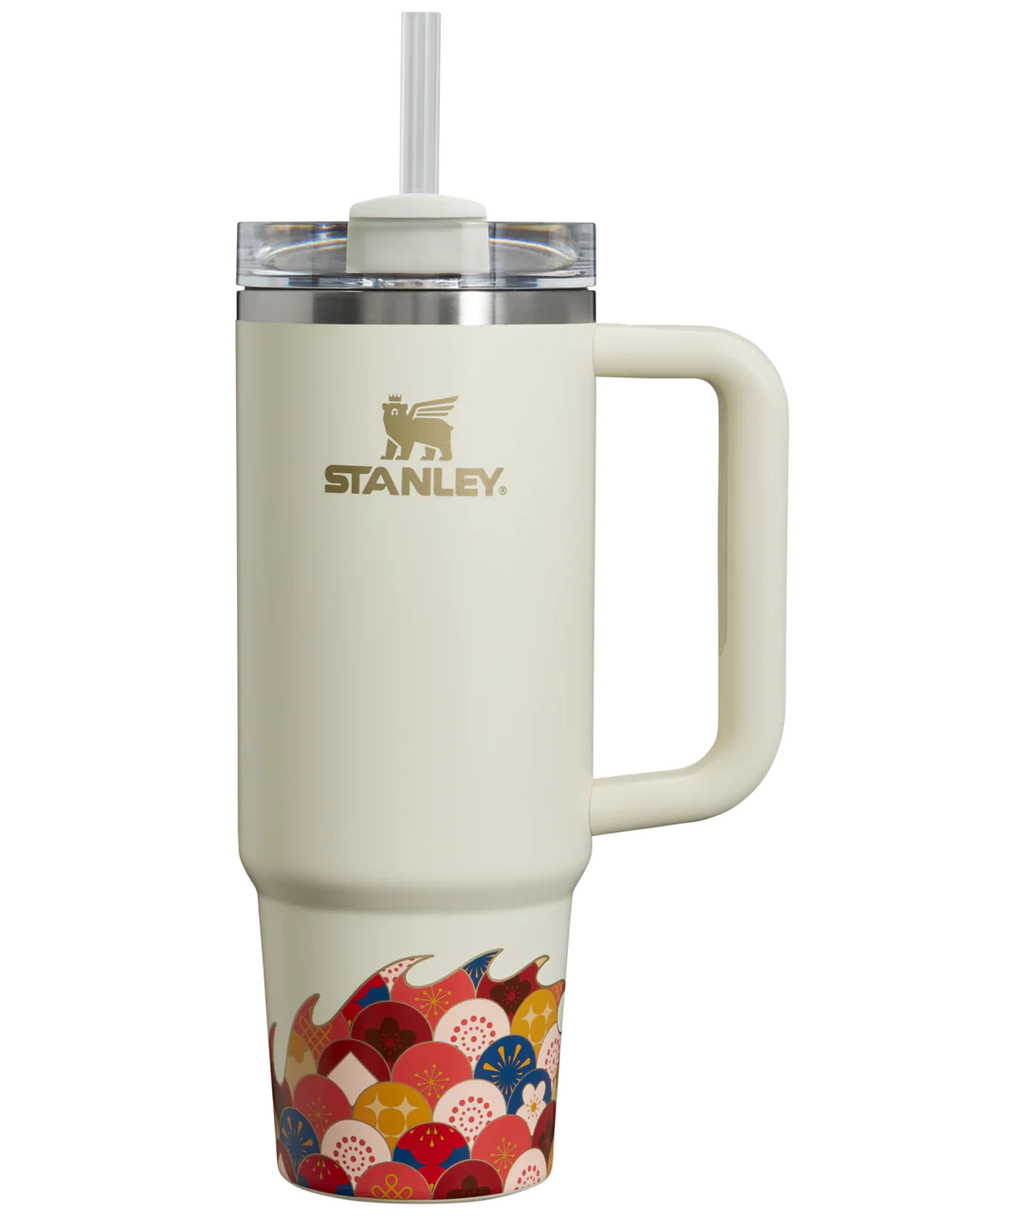 stanley?width=1024&height=1024&fit=cover&auto=webp